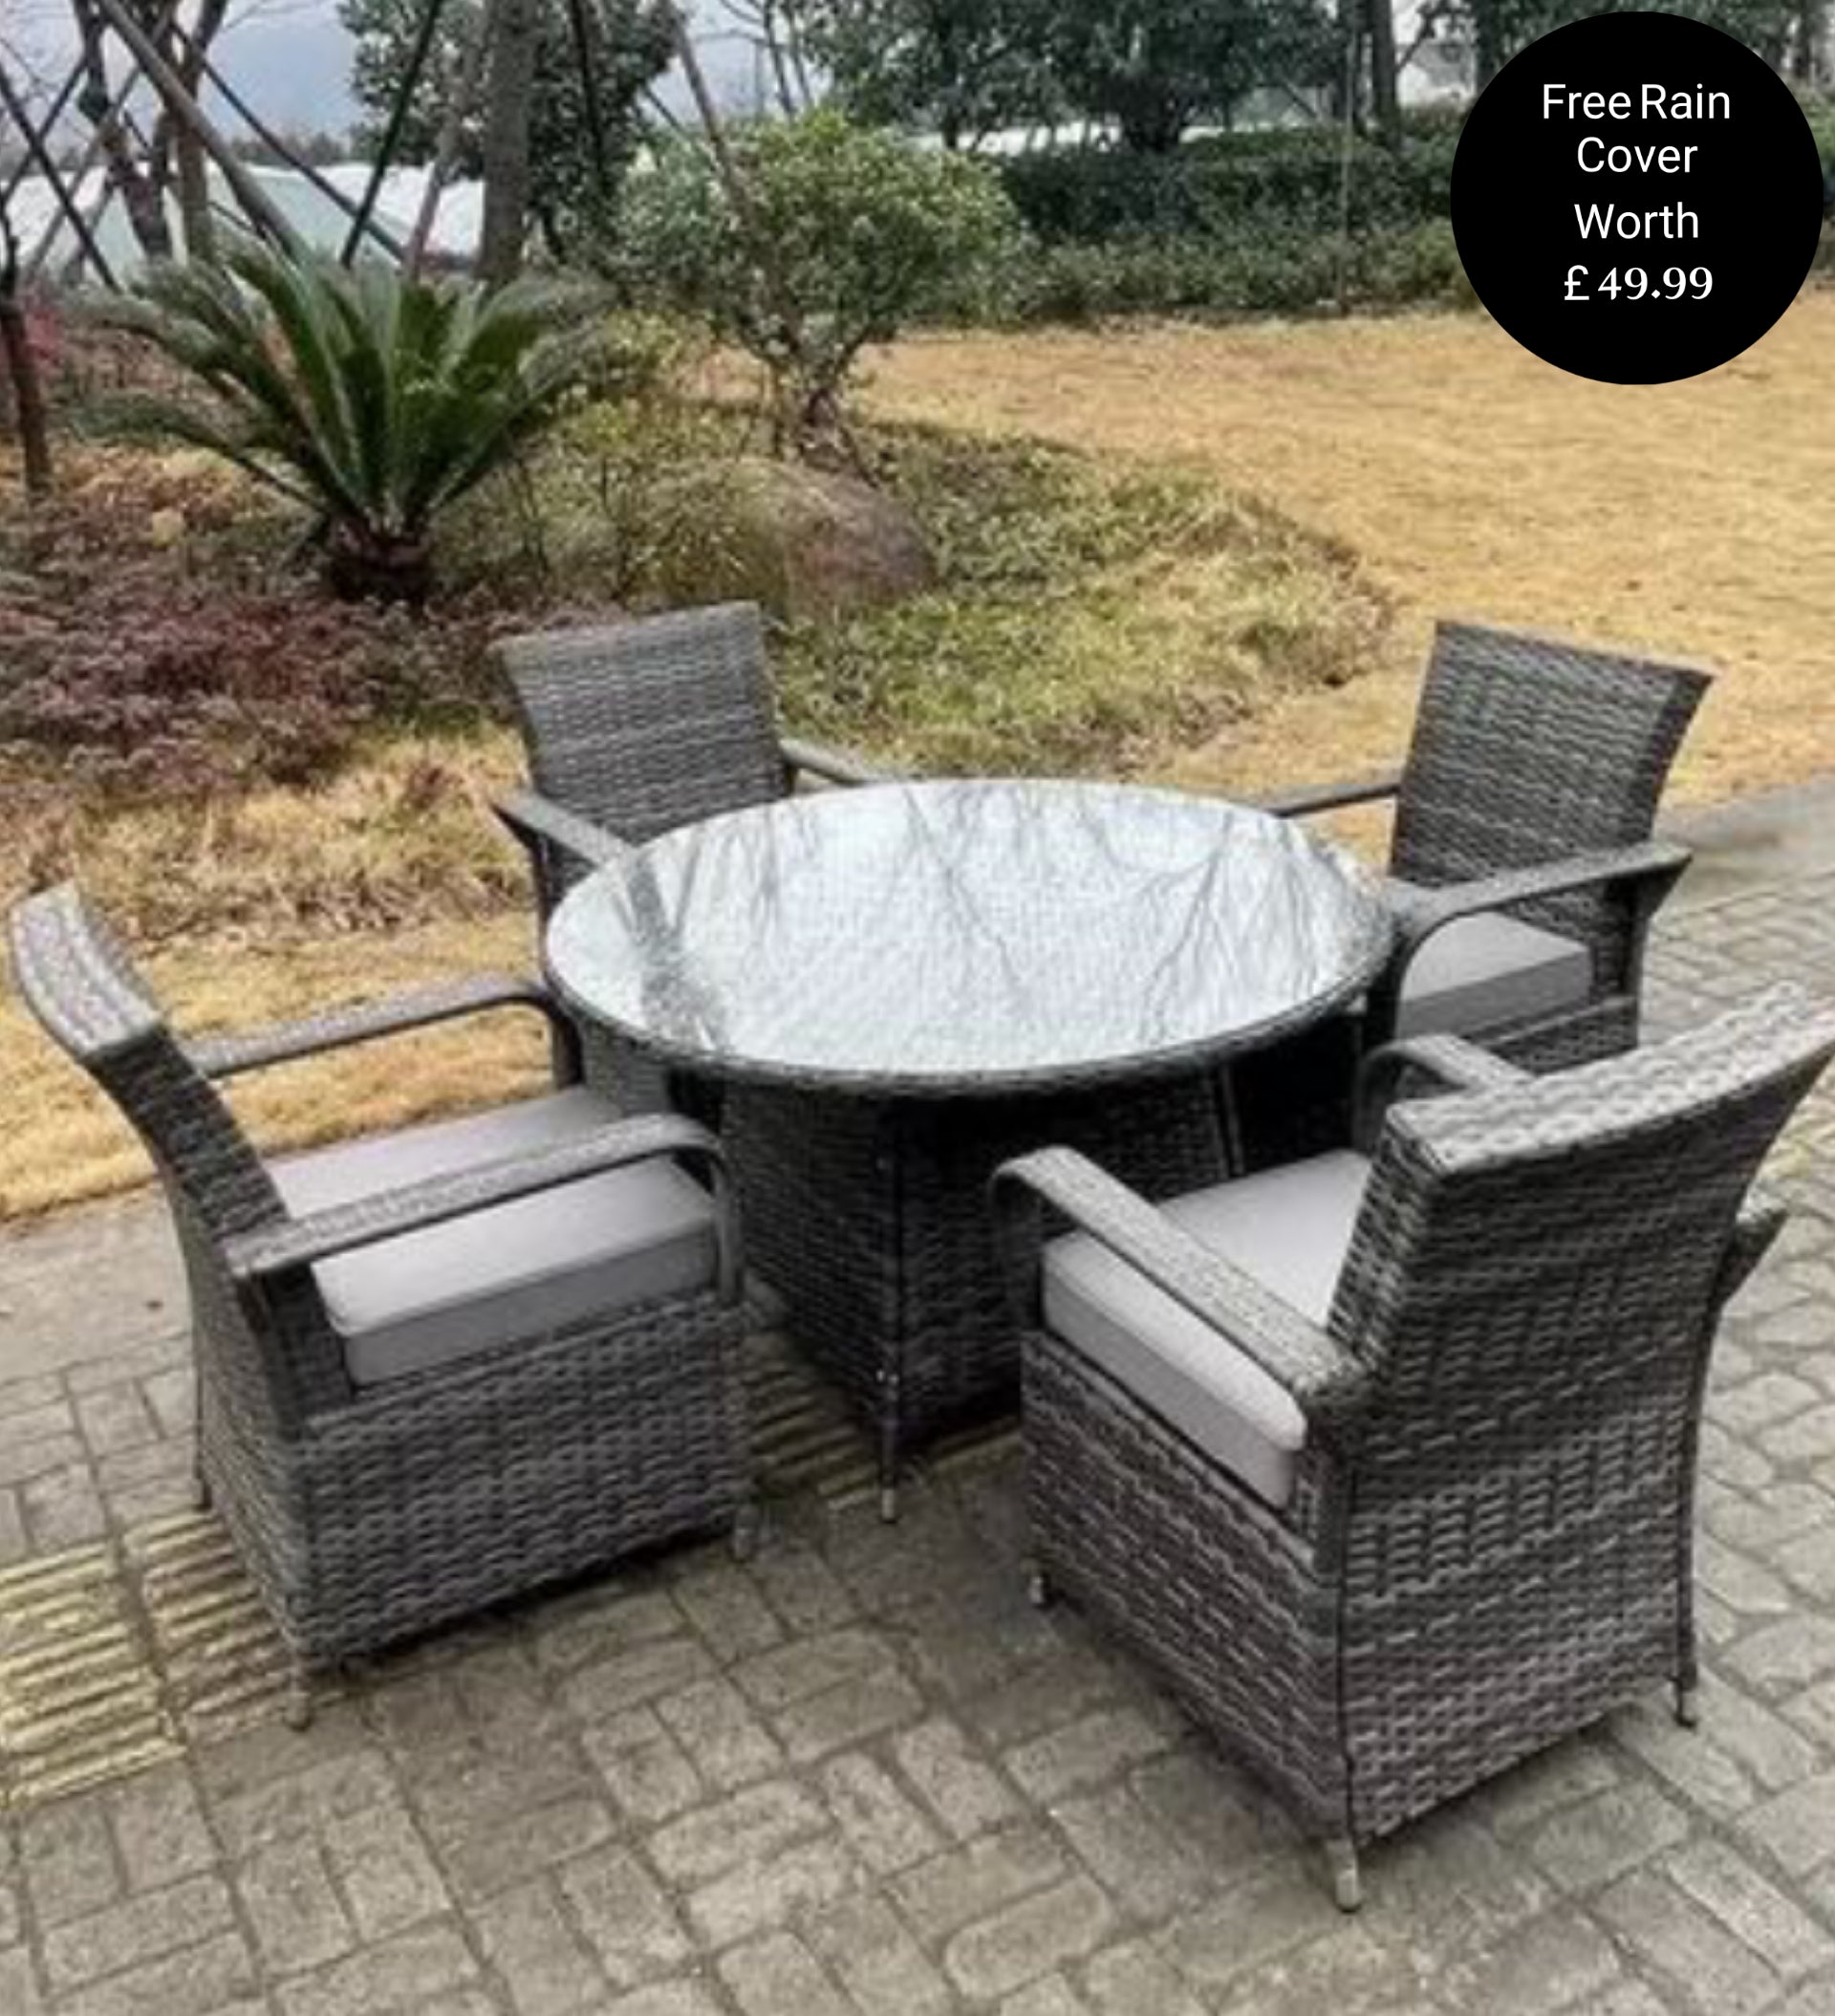 Cornwall Rattan Dining Set Table And Chair Sets Wicker Patio Outdoor 4 Chairs Plus Round Table